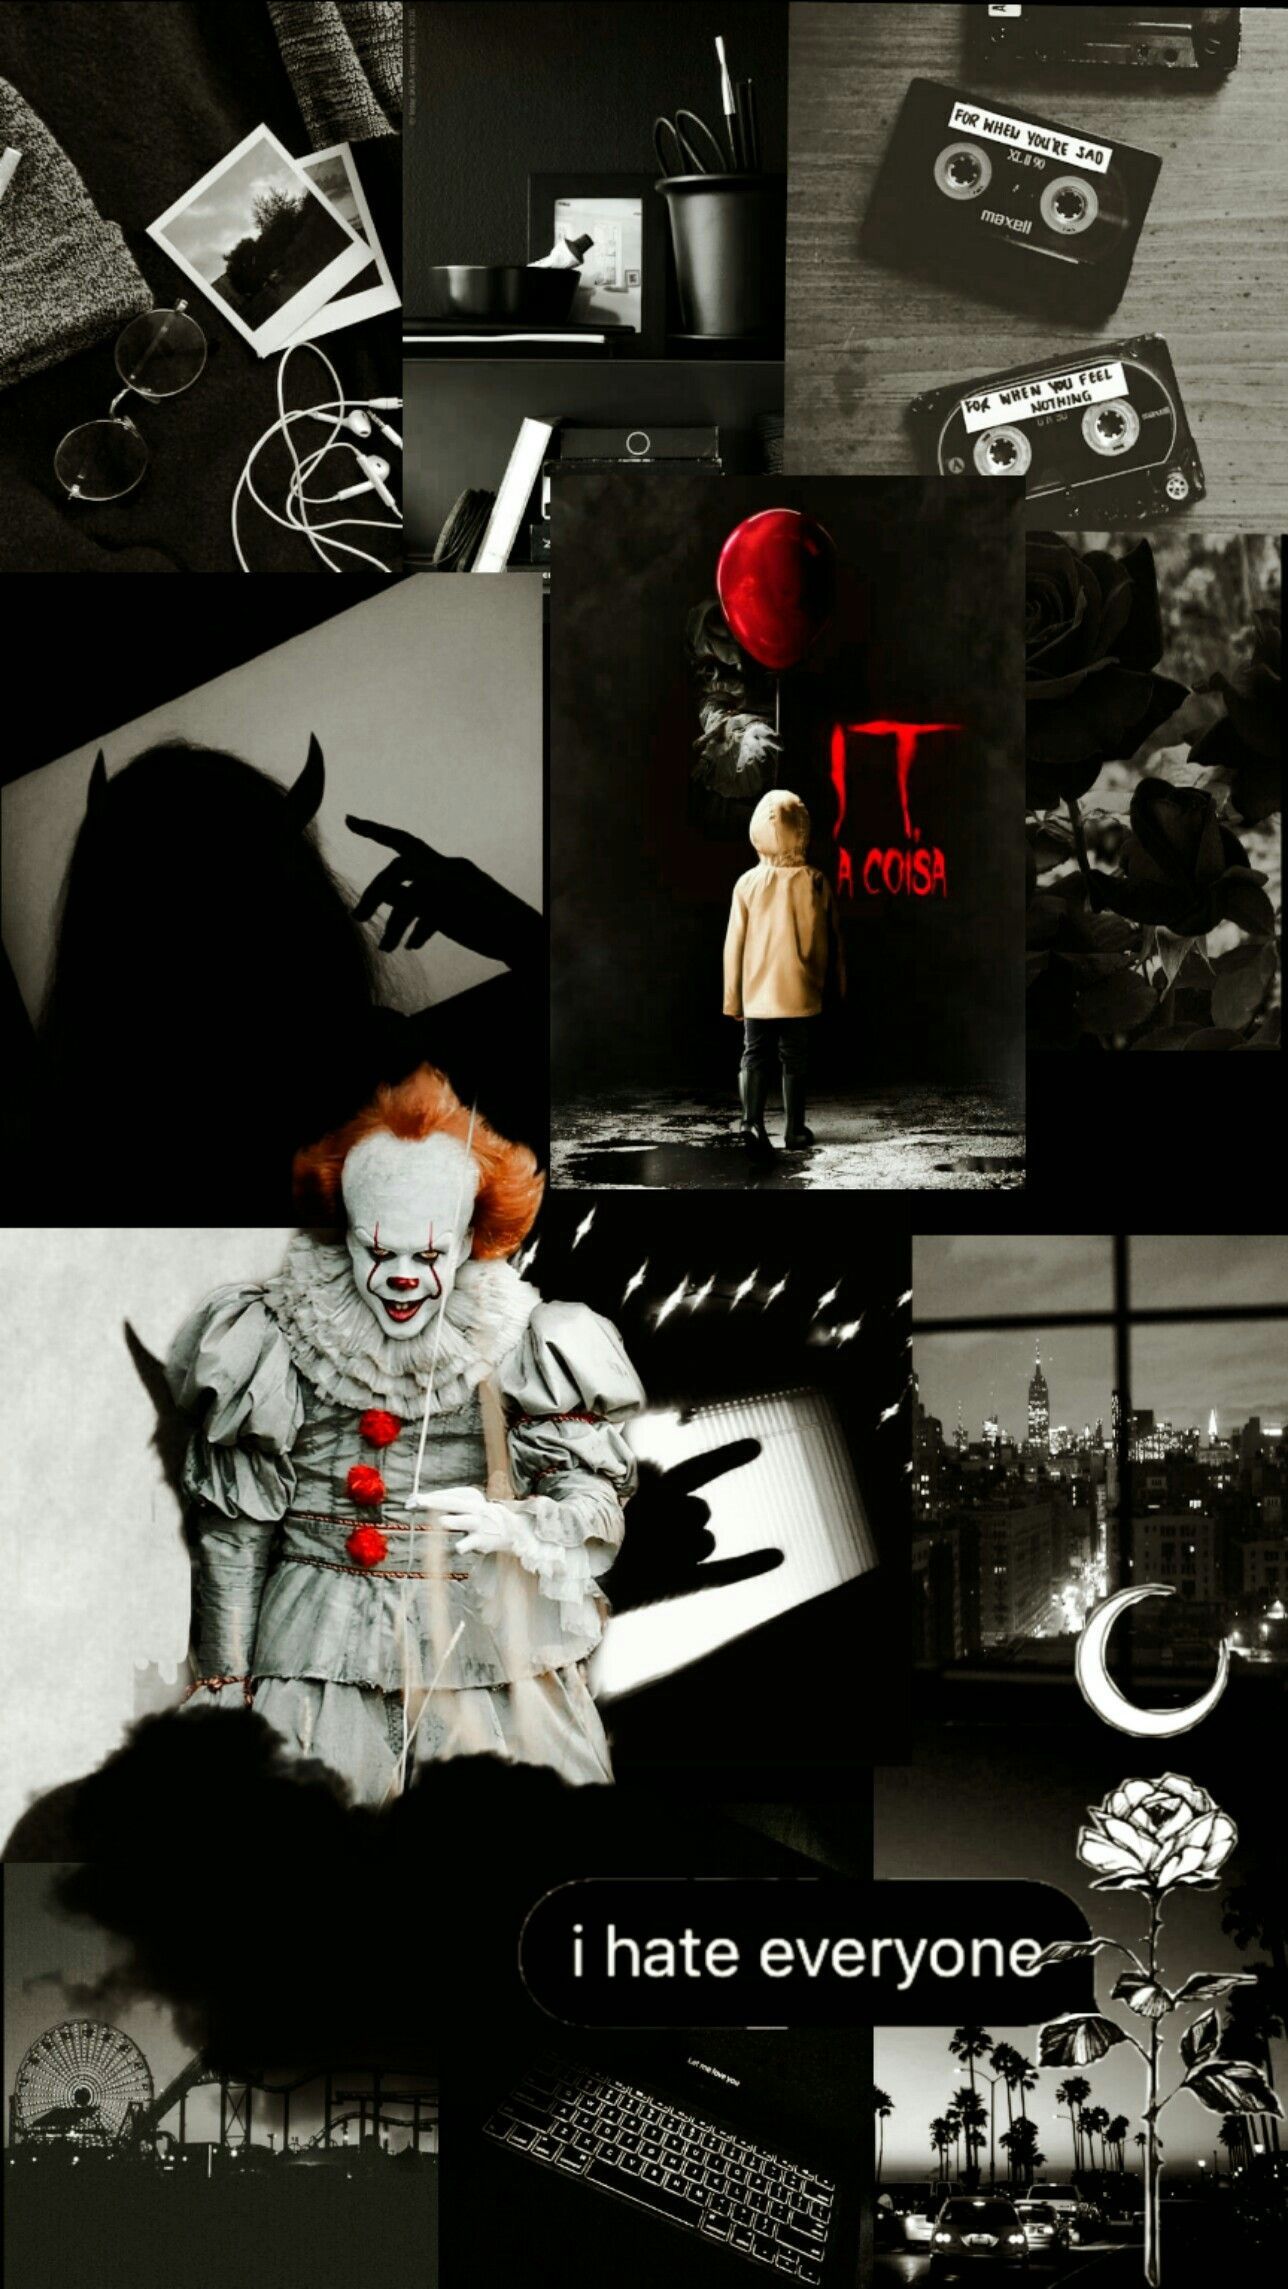 A collage of images with captions that say hate everyone - Clown